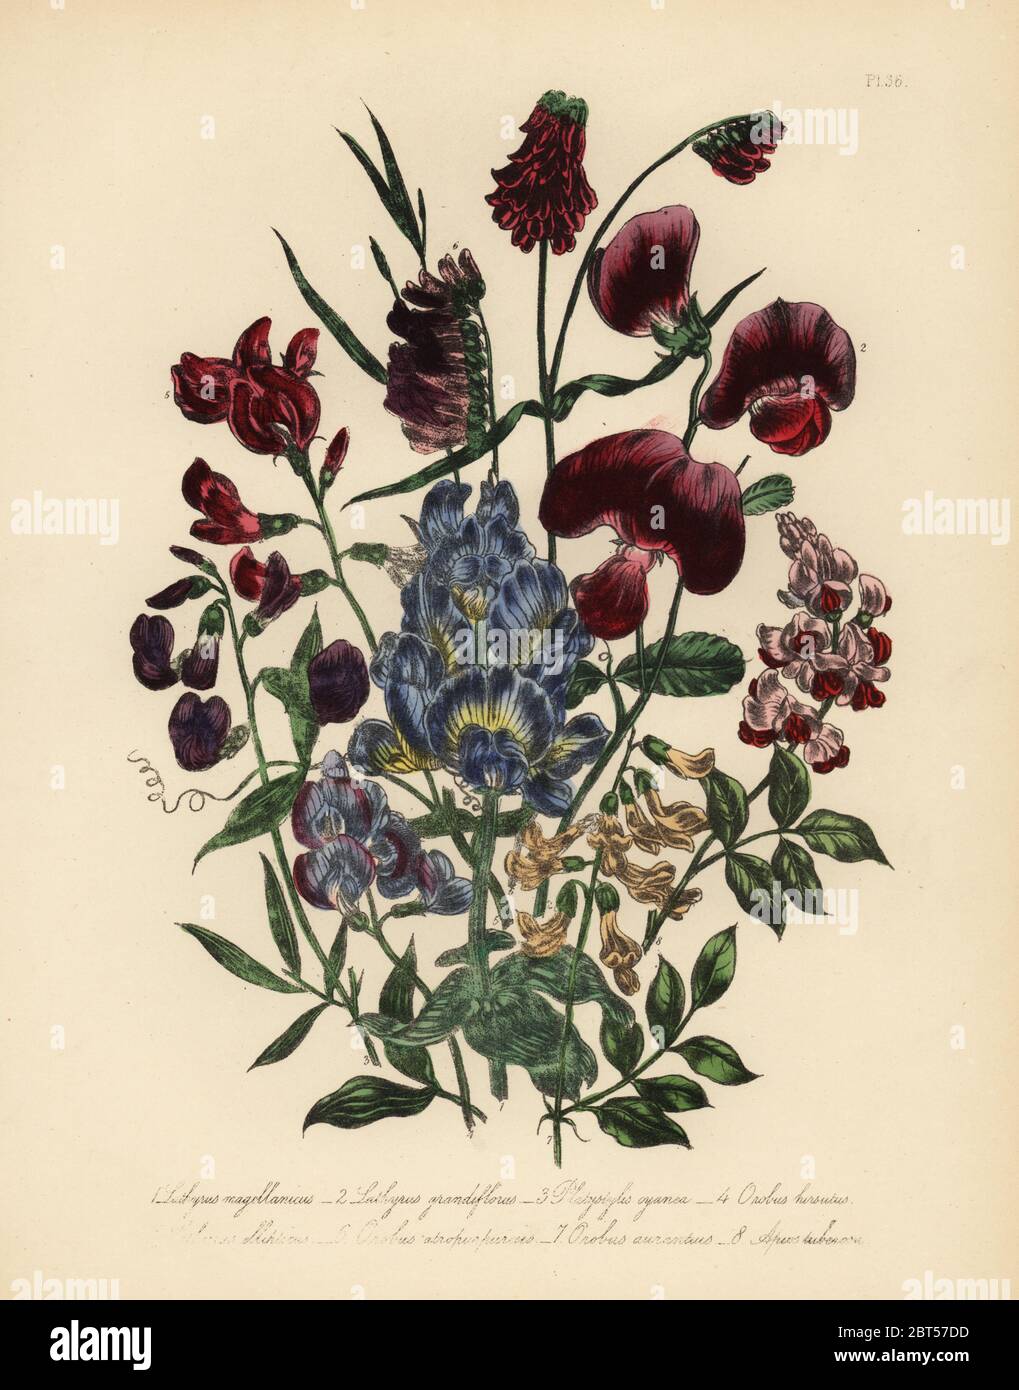 Lord Anson's pea, Lathyrus magellanicus, large-flowered everlasting pea, Lathyrus grandiflorus, blue-flowered platystylis, Platystylis cyanea, hairy bitter vetch, Orobus hirsutus, elliptic-leaved everlasting pea, Lathyrus ellipticus, dark purple bitter vetch, Orobus atro-purpureus, orange-coloured bitter vetch, Orobus aurantius, and Virginian earth nut, Apios tuberosa. Handfinished chromolithograph by Henry Noel Humphreys after an illustration by Jane Loudon from Mrs. Jane Loudon's Ladies Flower Garden of Ornamental Perennials, William S. Orr, London, 1849. Stock Photo